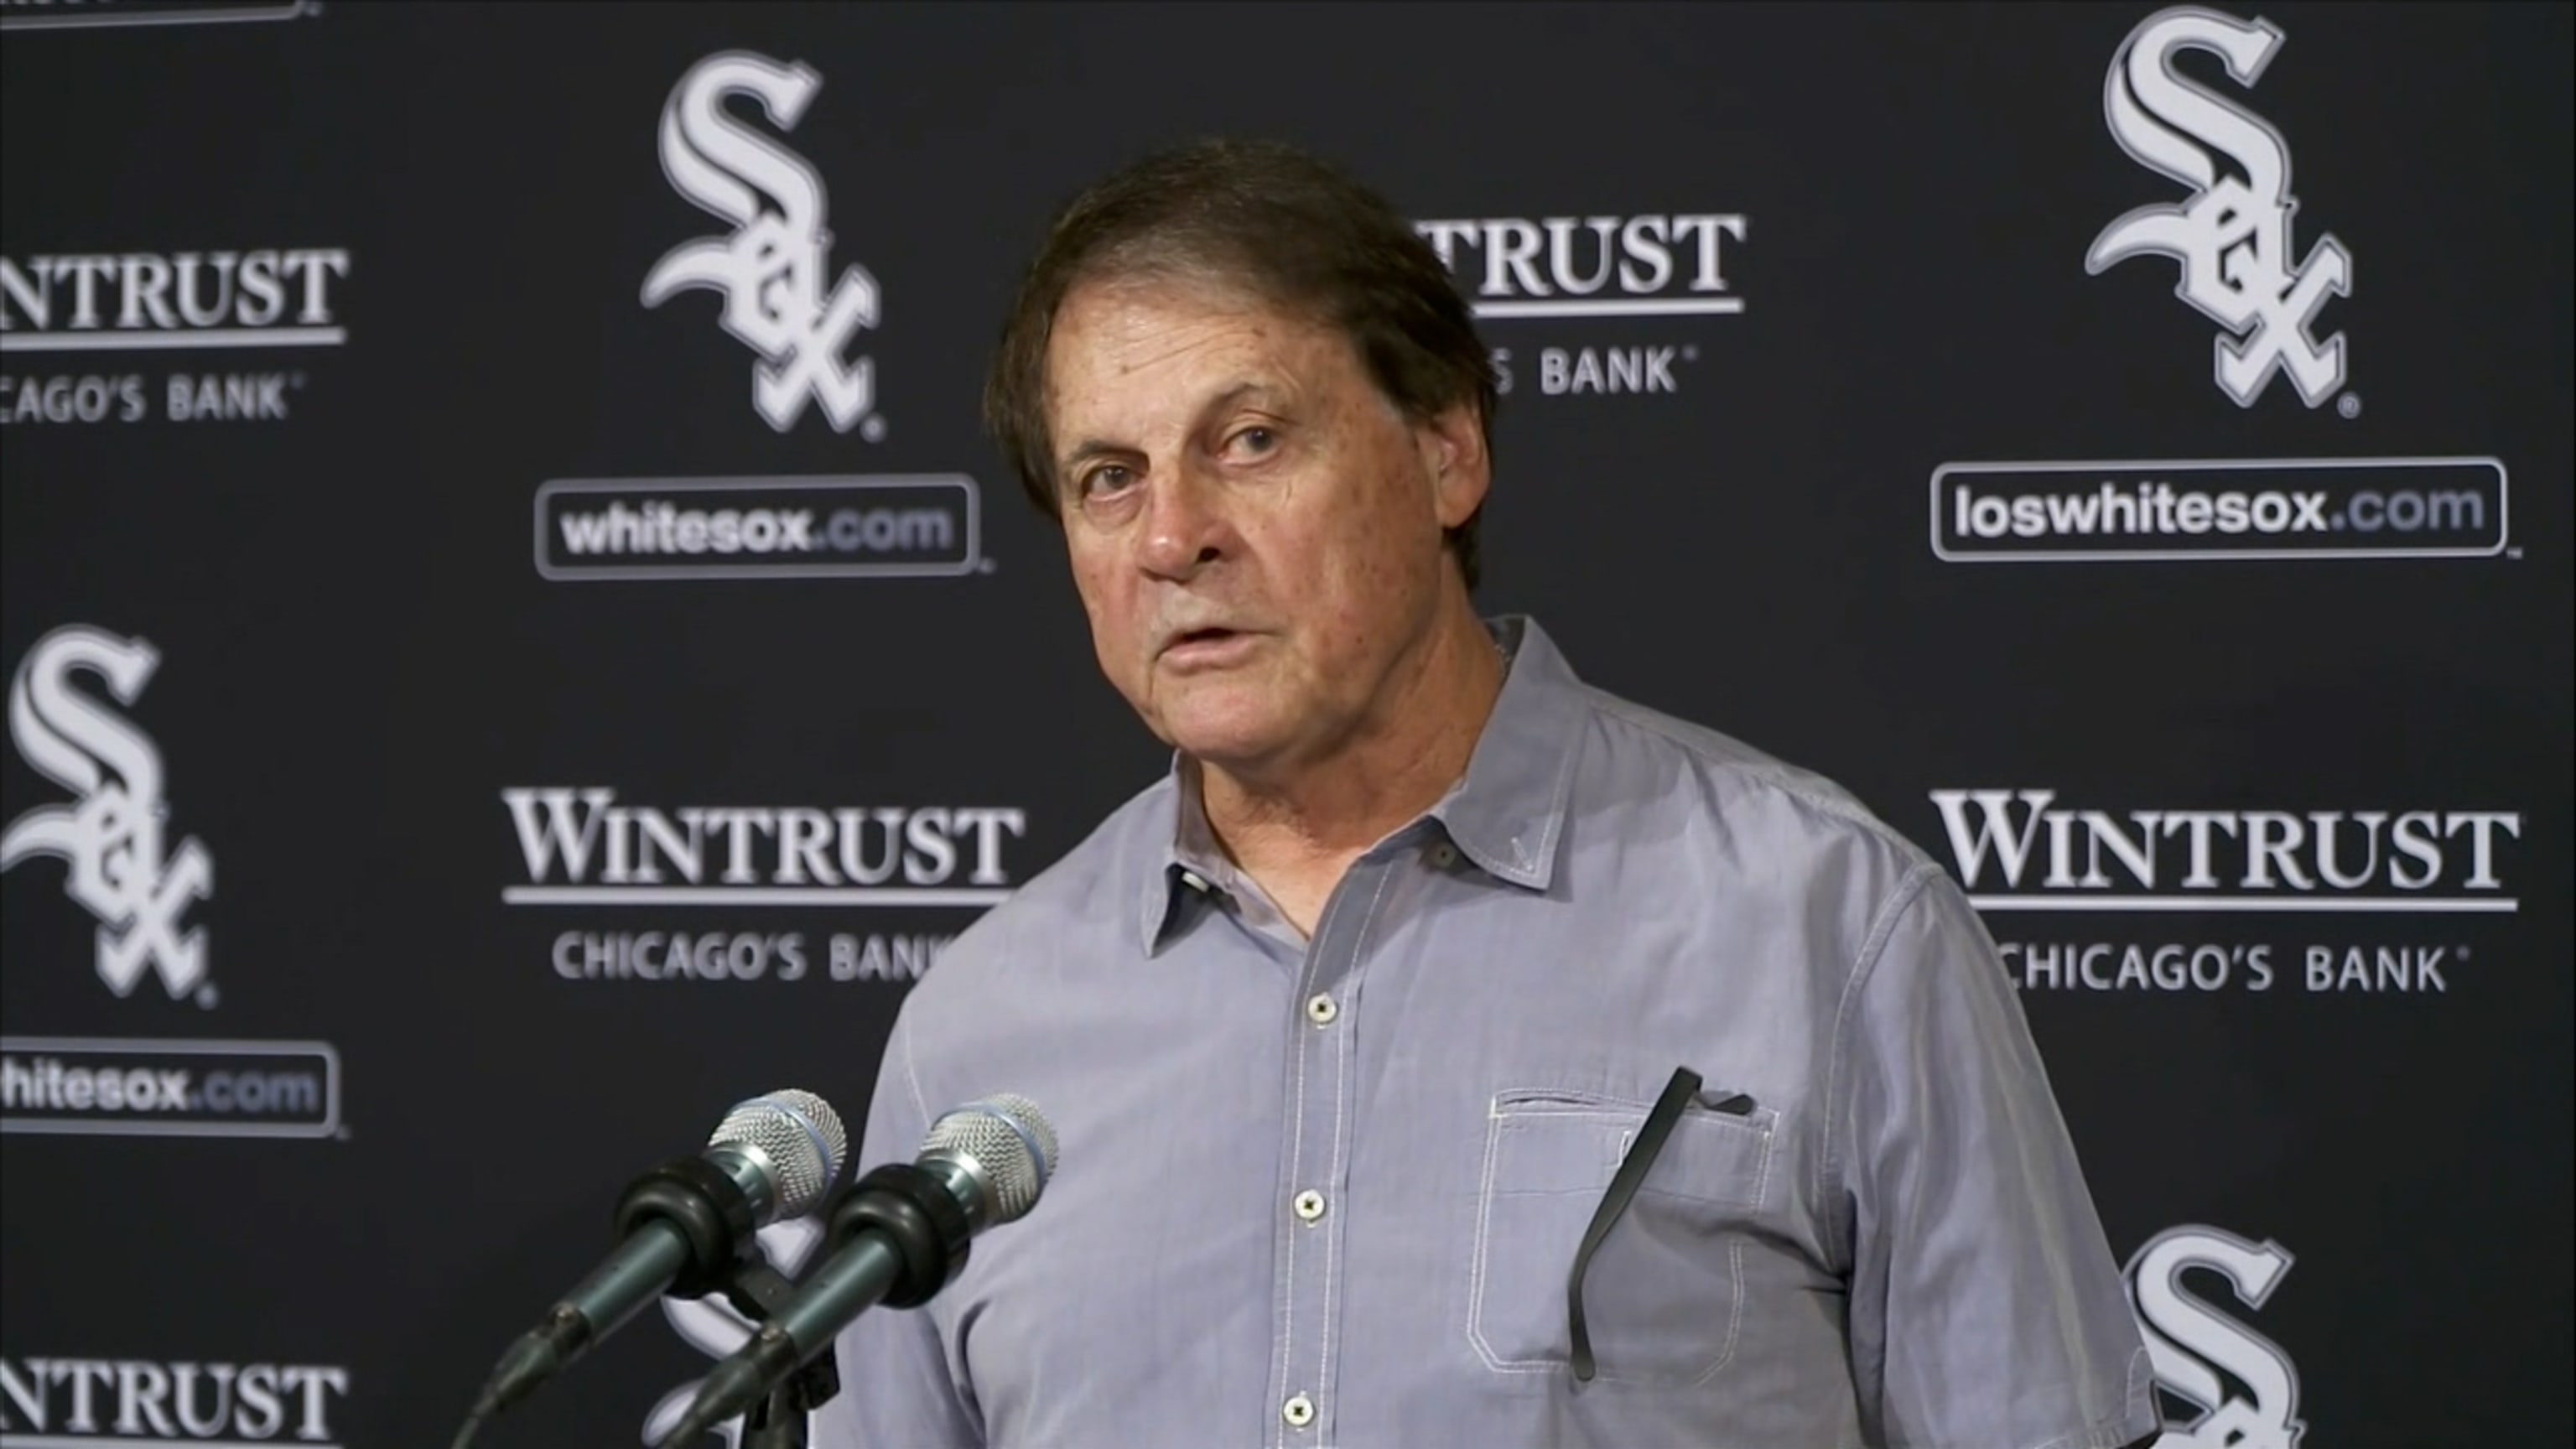 Chicago White Sox have to fire Tony La Russa after latest idiocy